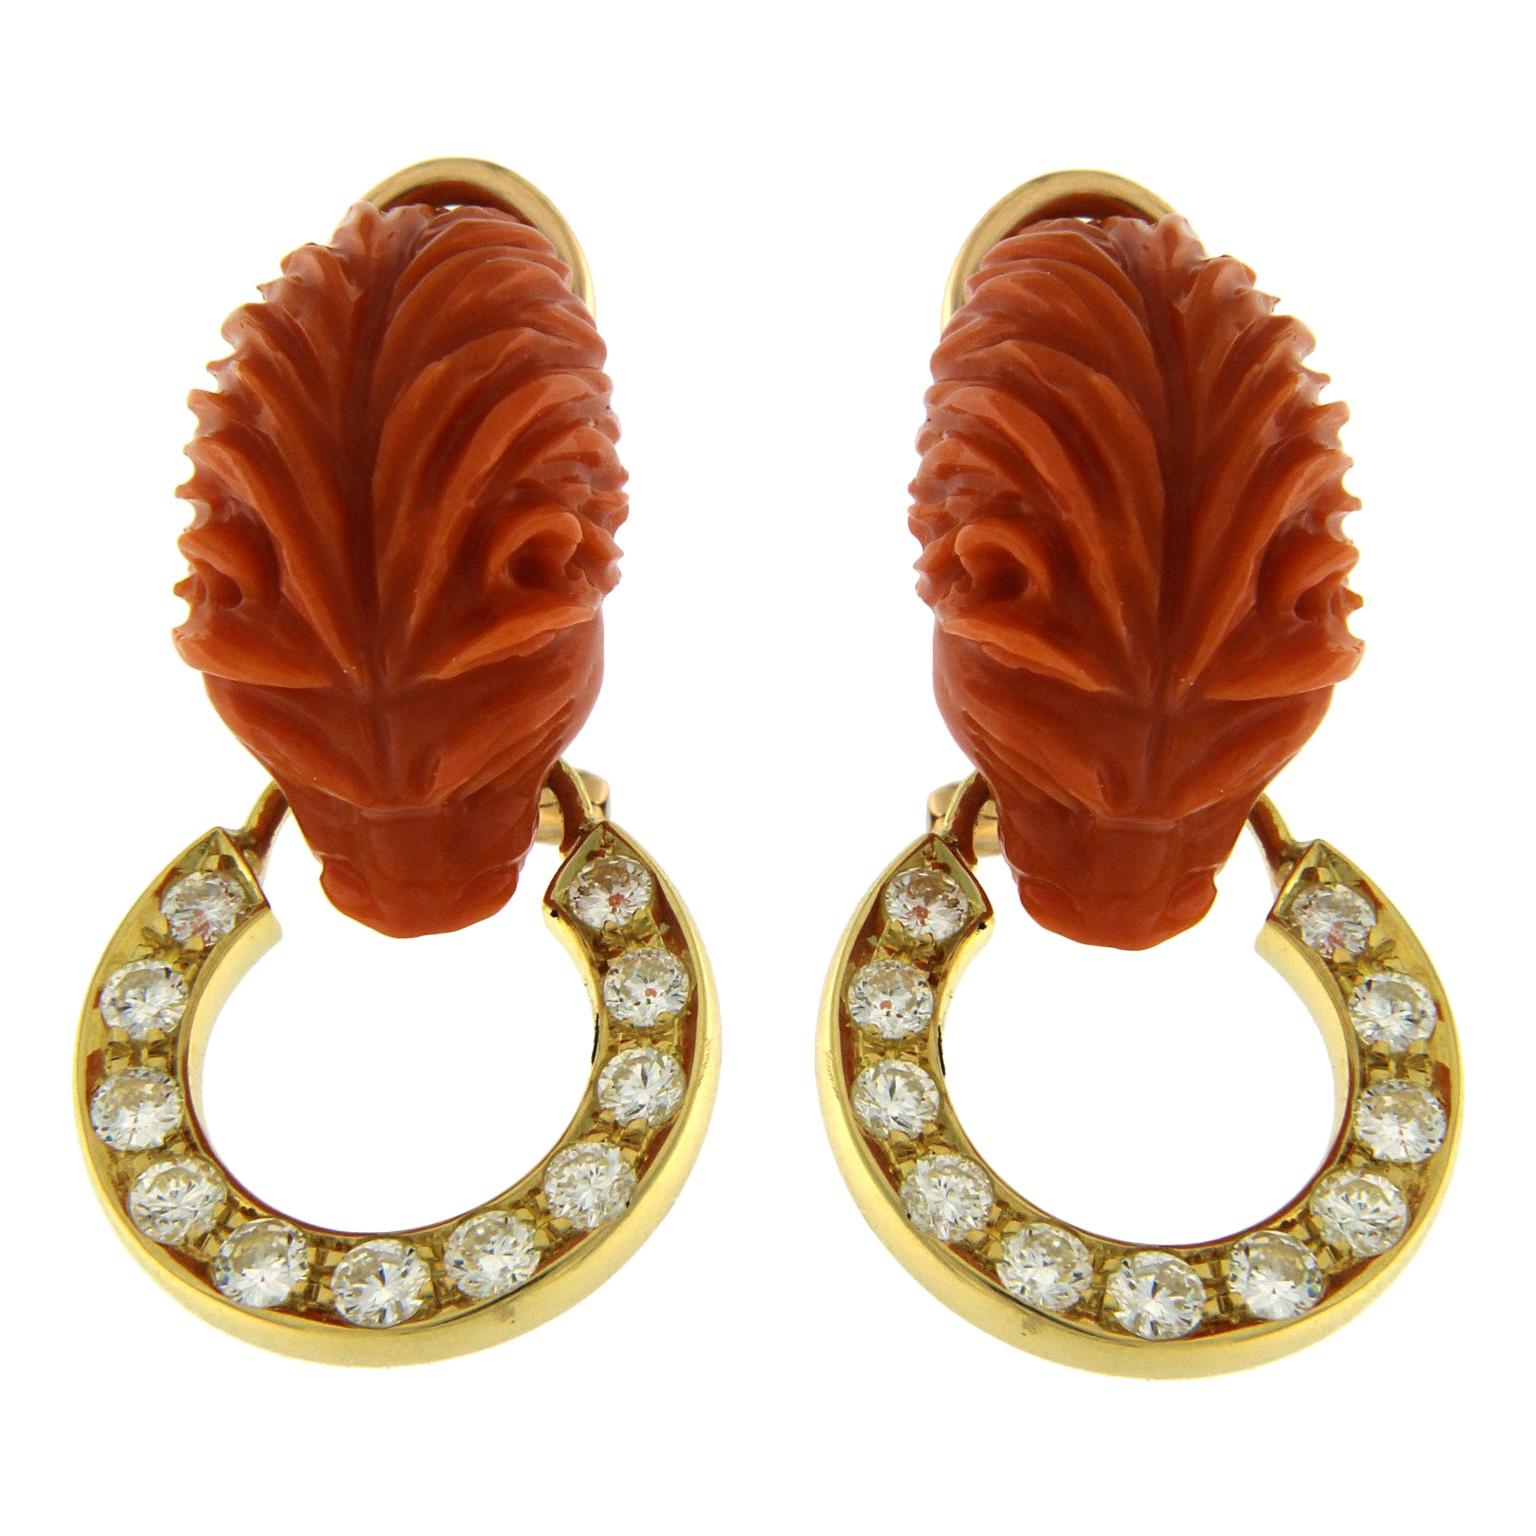 Coral Lion on 18 Karat Earrings with Diamonds